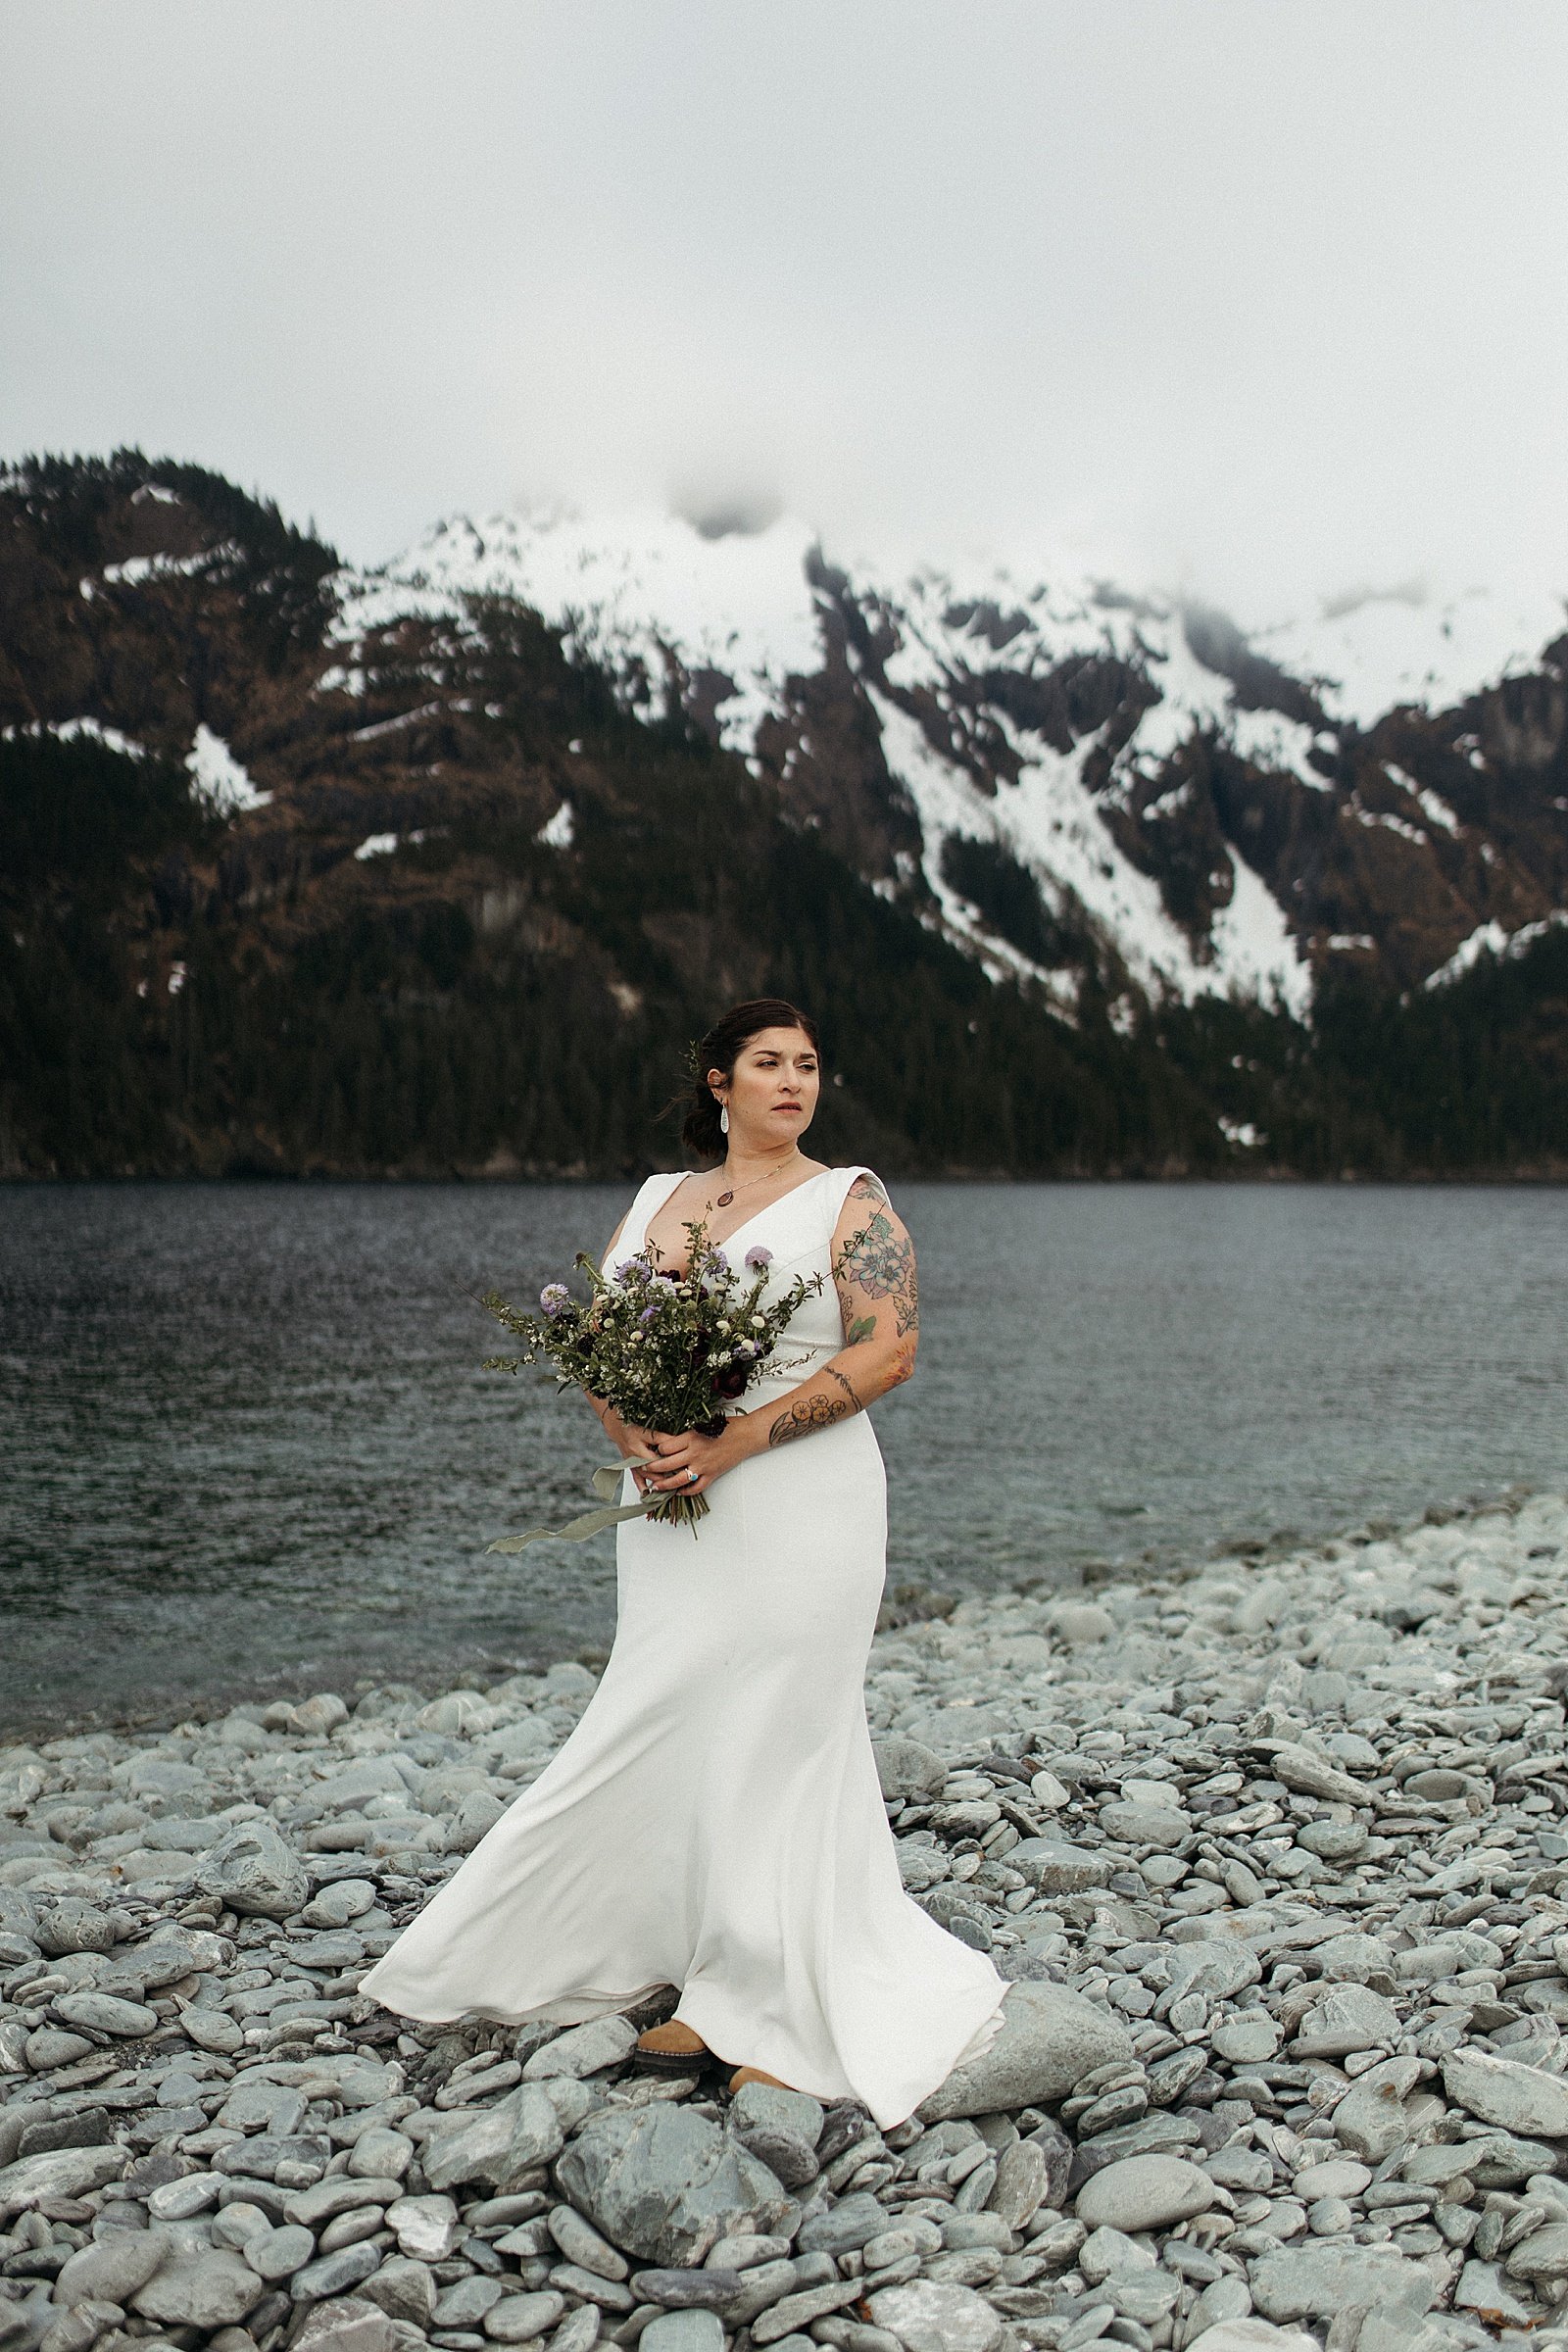  Bride standing in front of water and mountains by Rachel Struve Photography 